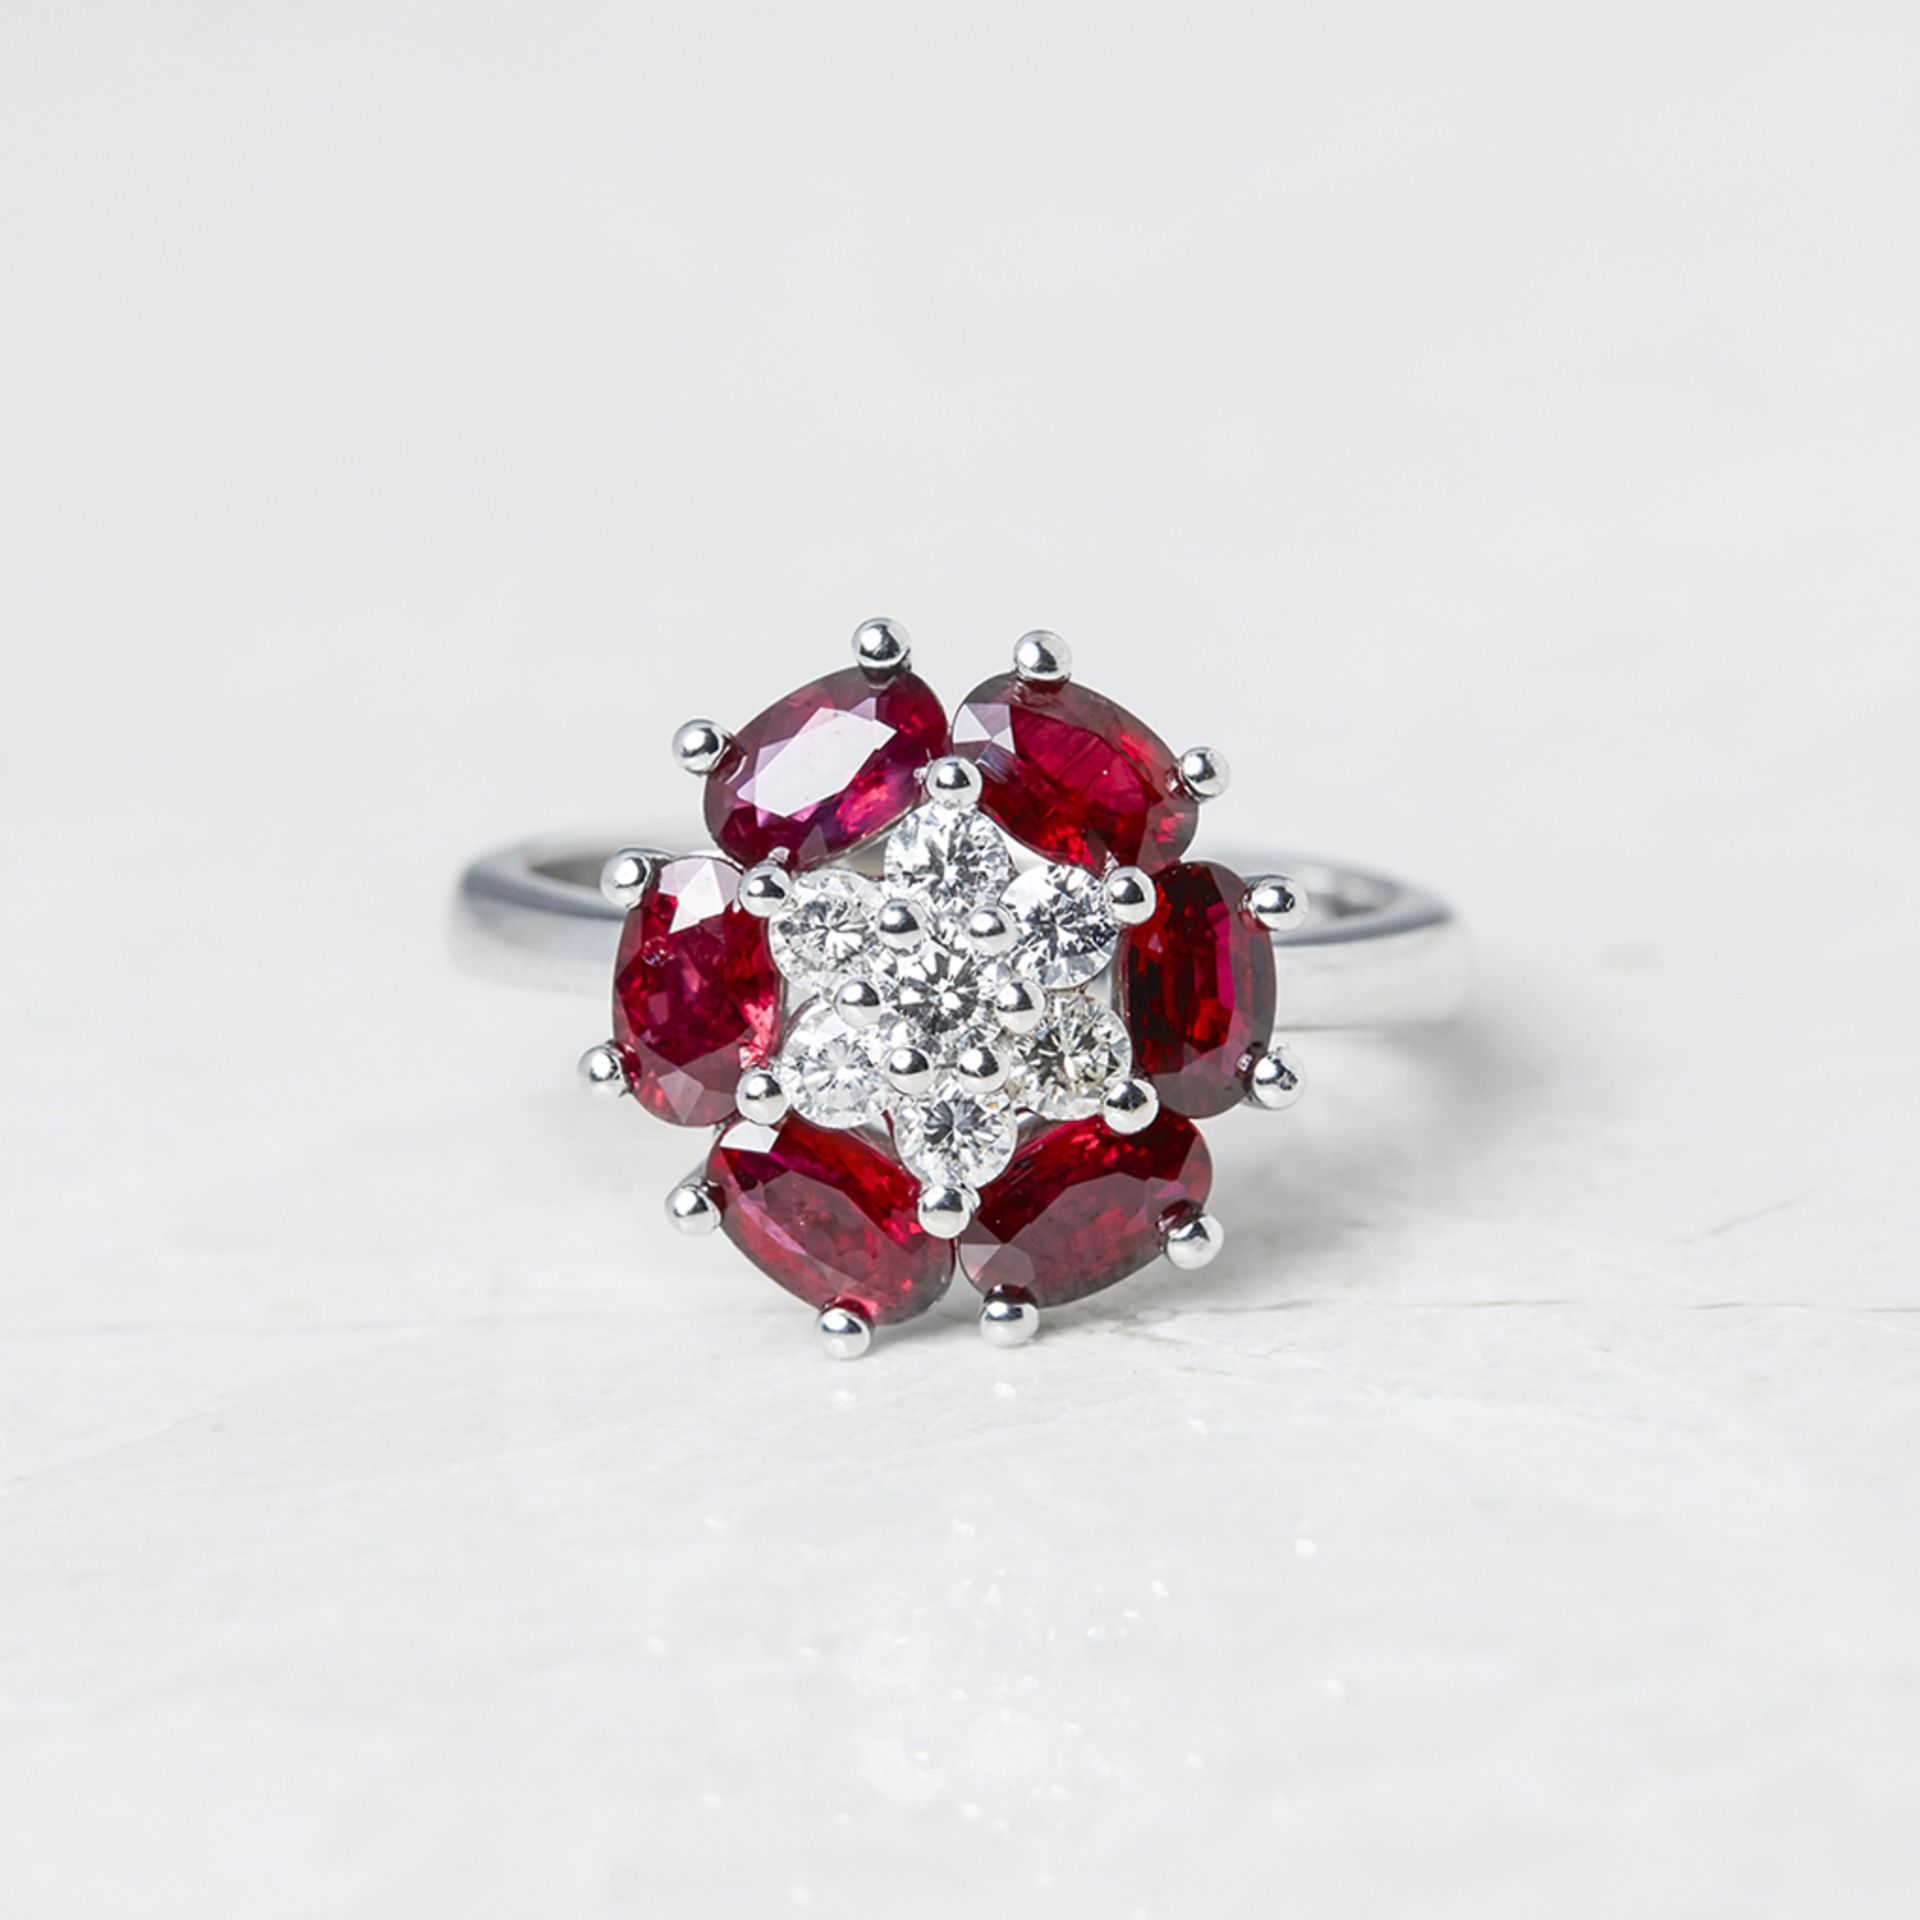 Camdame 18k White Gold 0.60ct Ruby & 0.25ct Diamond Floral Design Ring - Image 2 of 6